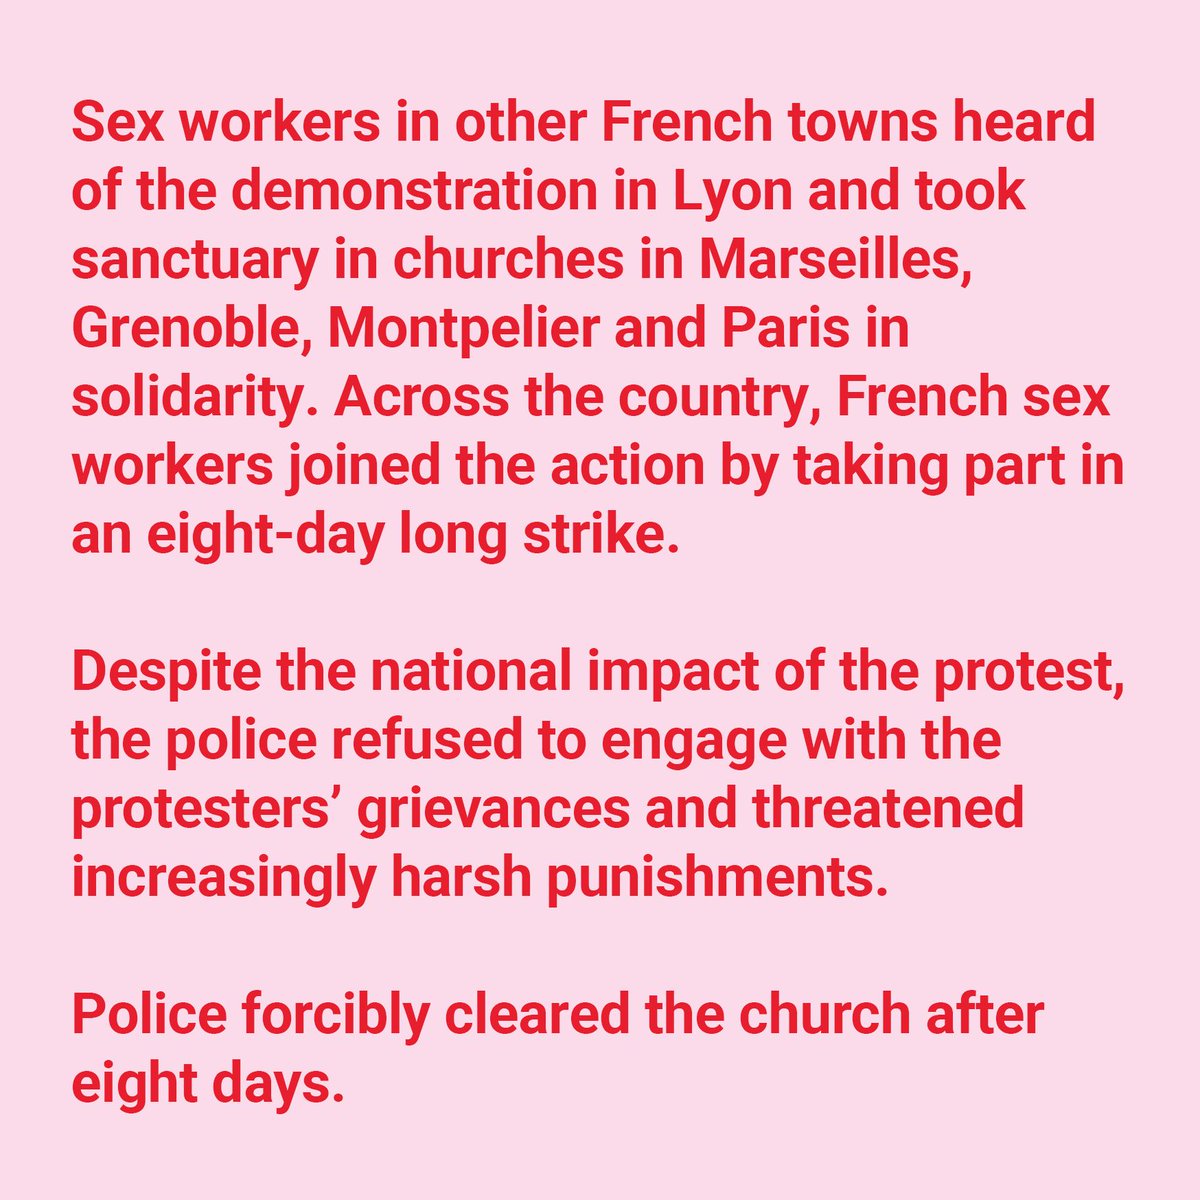 INTERNATIONAL WHORES' DAY: On 2nd June 1975, more than 100 sex workers and their allies began an 8-day demonstration at the St Nizier Church in Lyon, France to protest criminalised and exploitative working and living conditions.